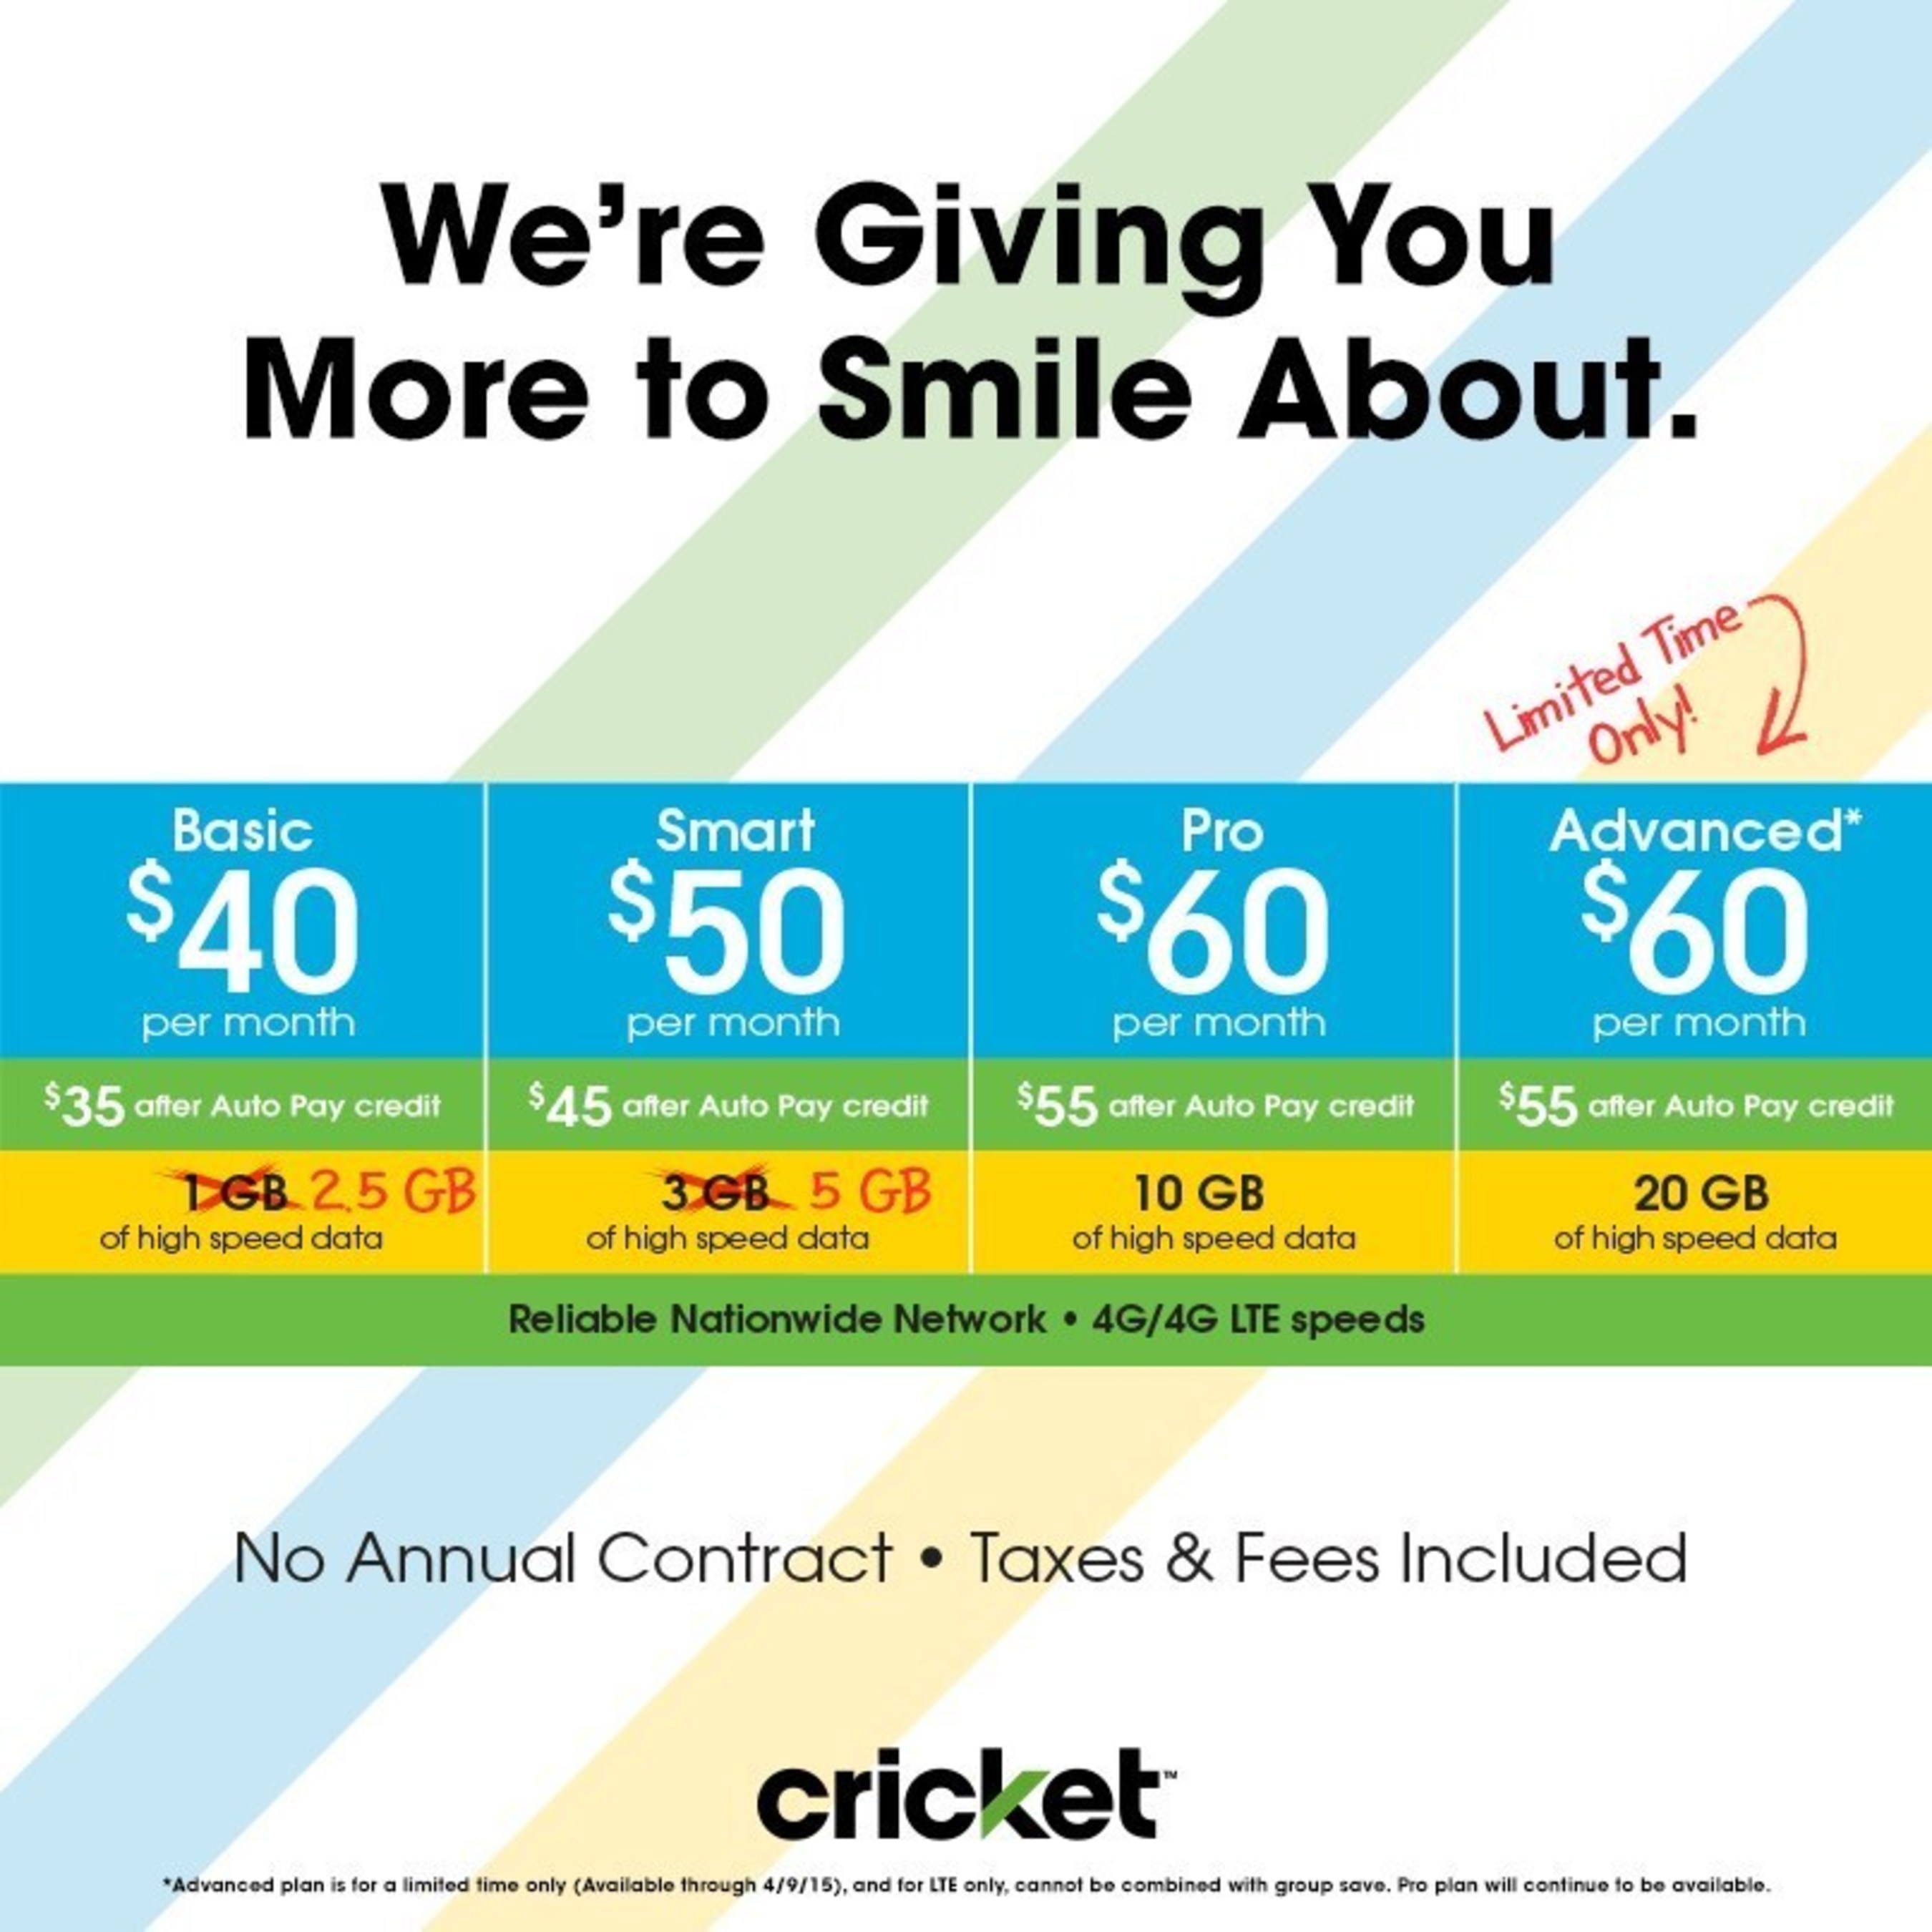 For a limited time only, Cricket to offer 20GB of high speed LTE data for $55/mo, after $5 Auto-Pay credit